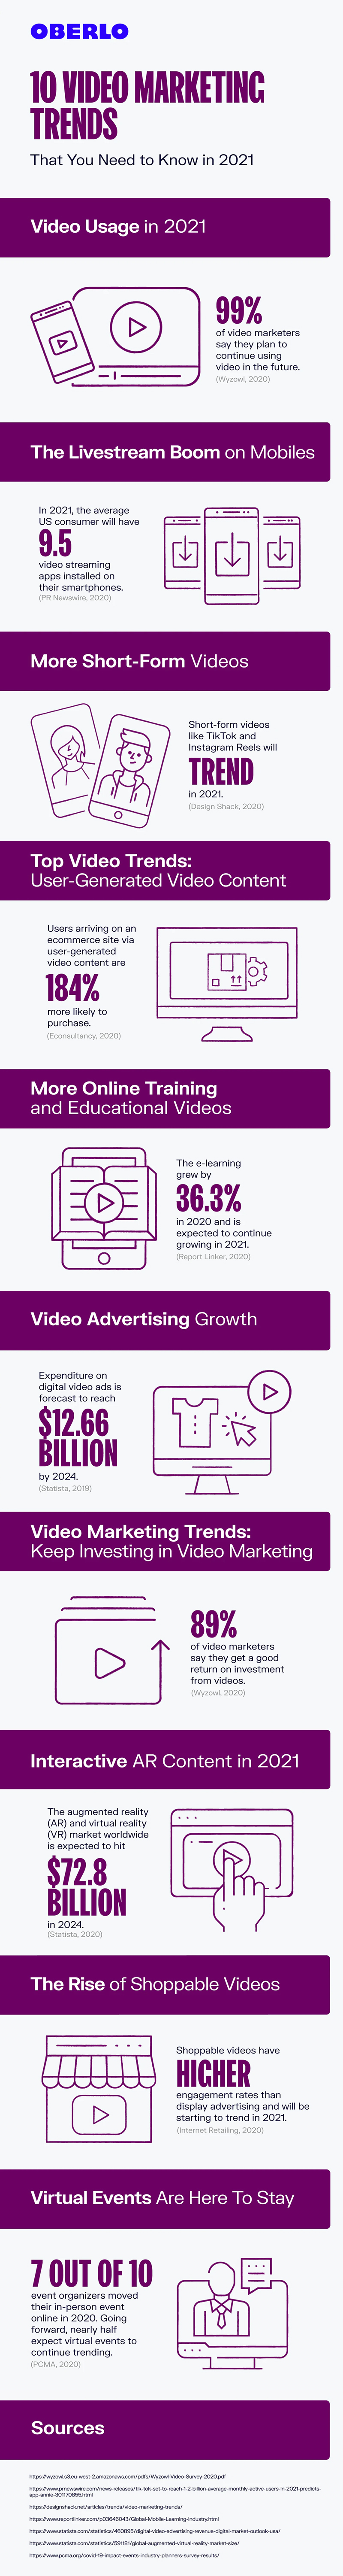 10 video marketing trends to guide your online strategy in 2021 infographic